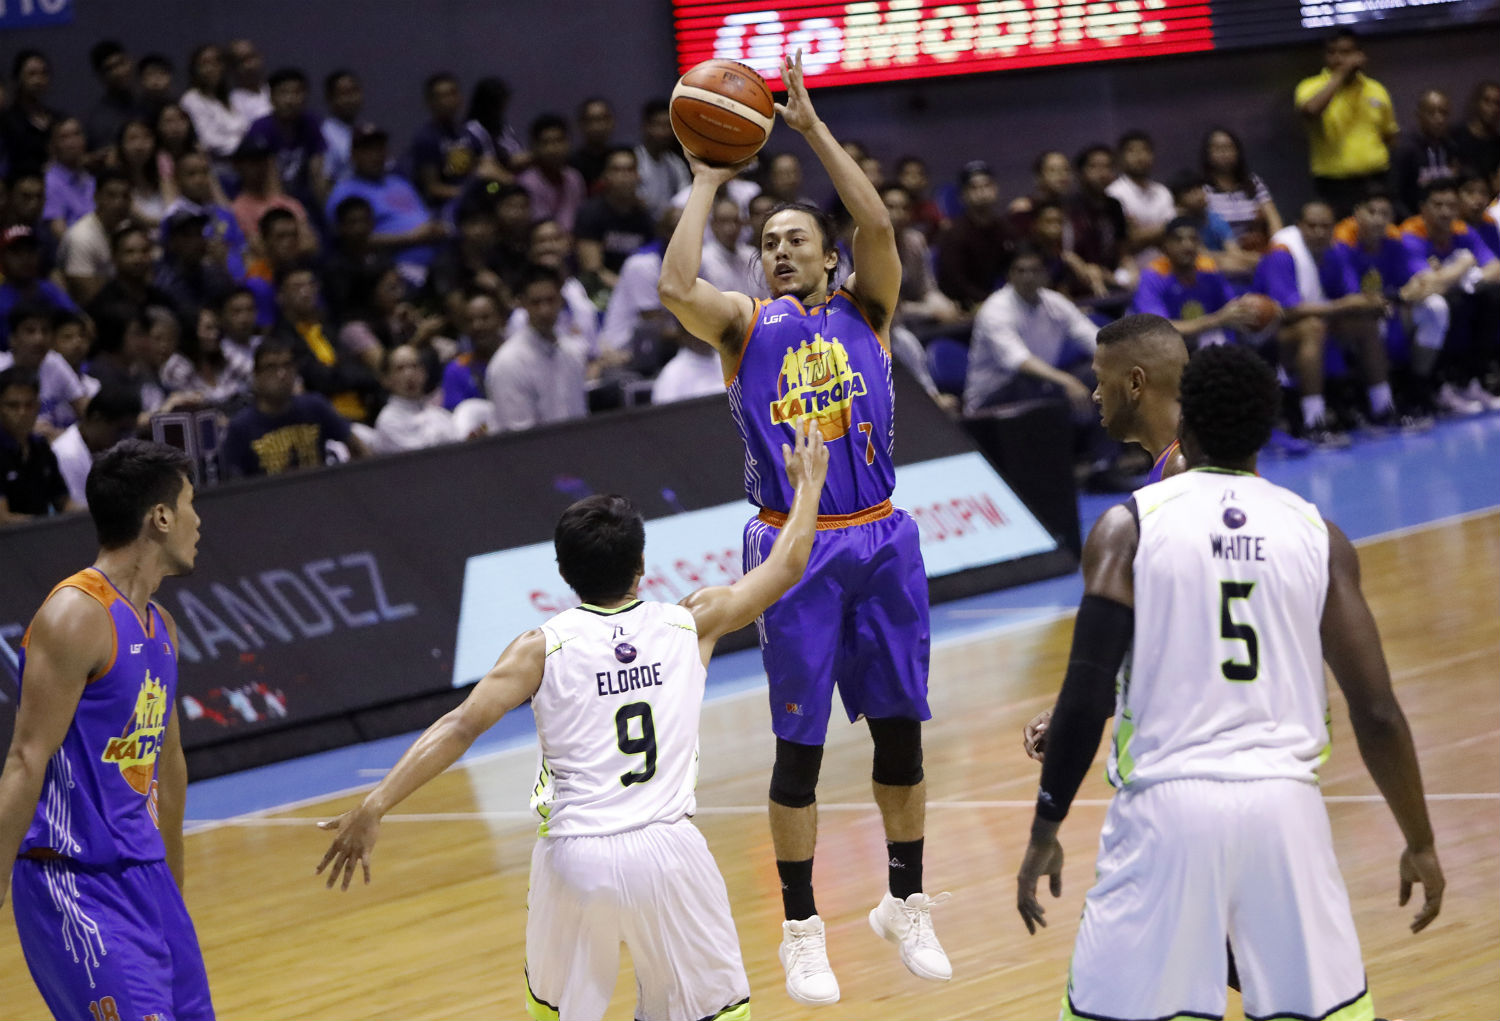 DECENT DEBUT. Terrence Romeo finishes with 11 points, 3 assists and two rebounds against 5 turnovers in his debut for the TNT KaTropa. Photo by PBA Images. 